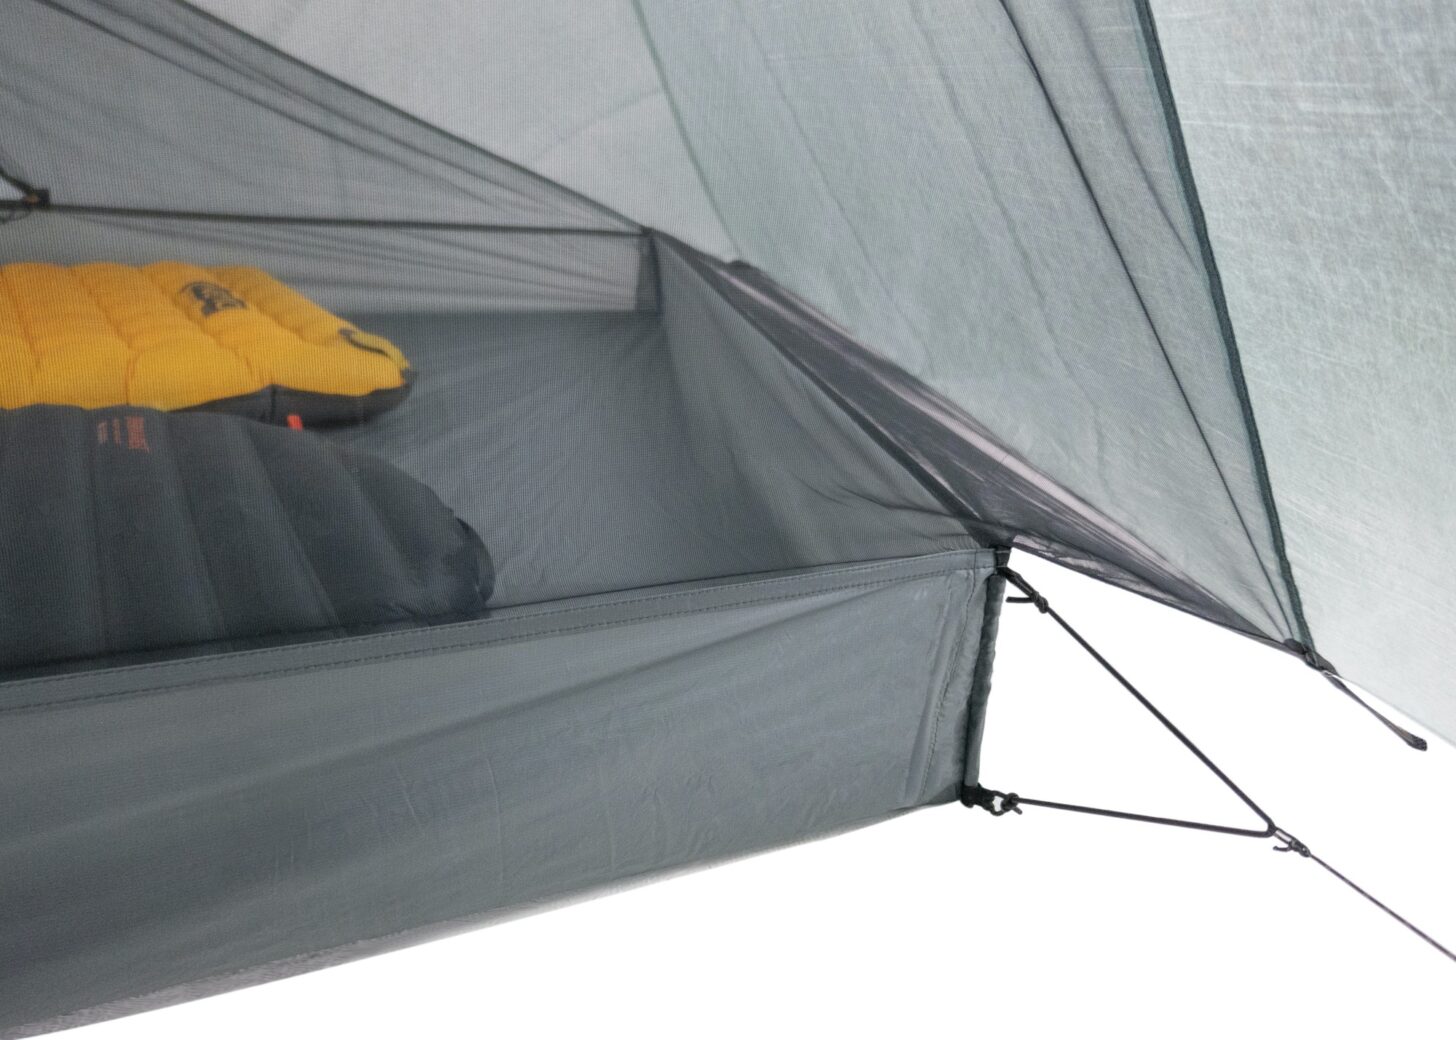 A corner of a tent is shown with the guyline stretched tight.